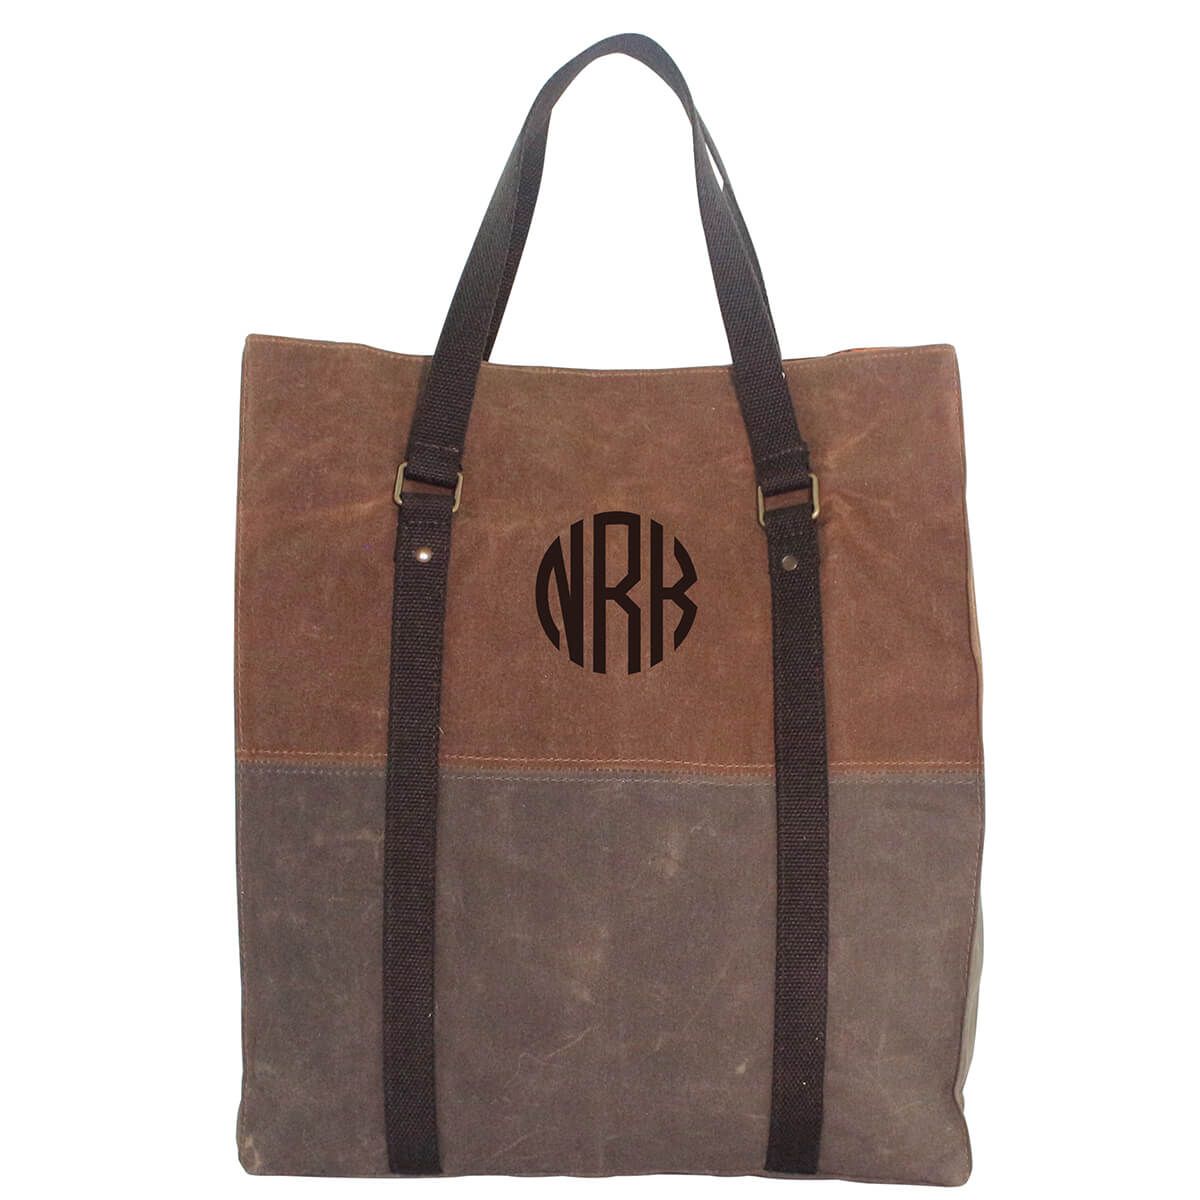 Monogrammed Waxed Canvas Travel Voyager Tote Bag Luggage Bag